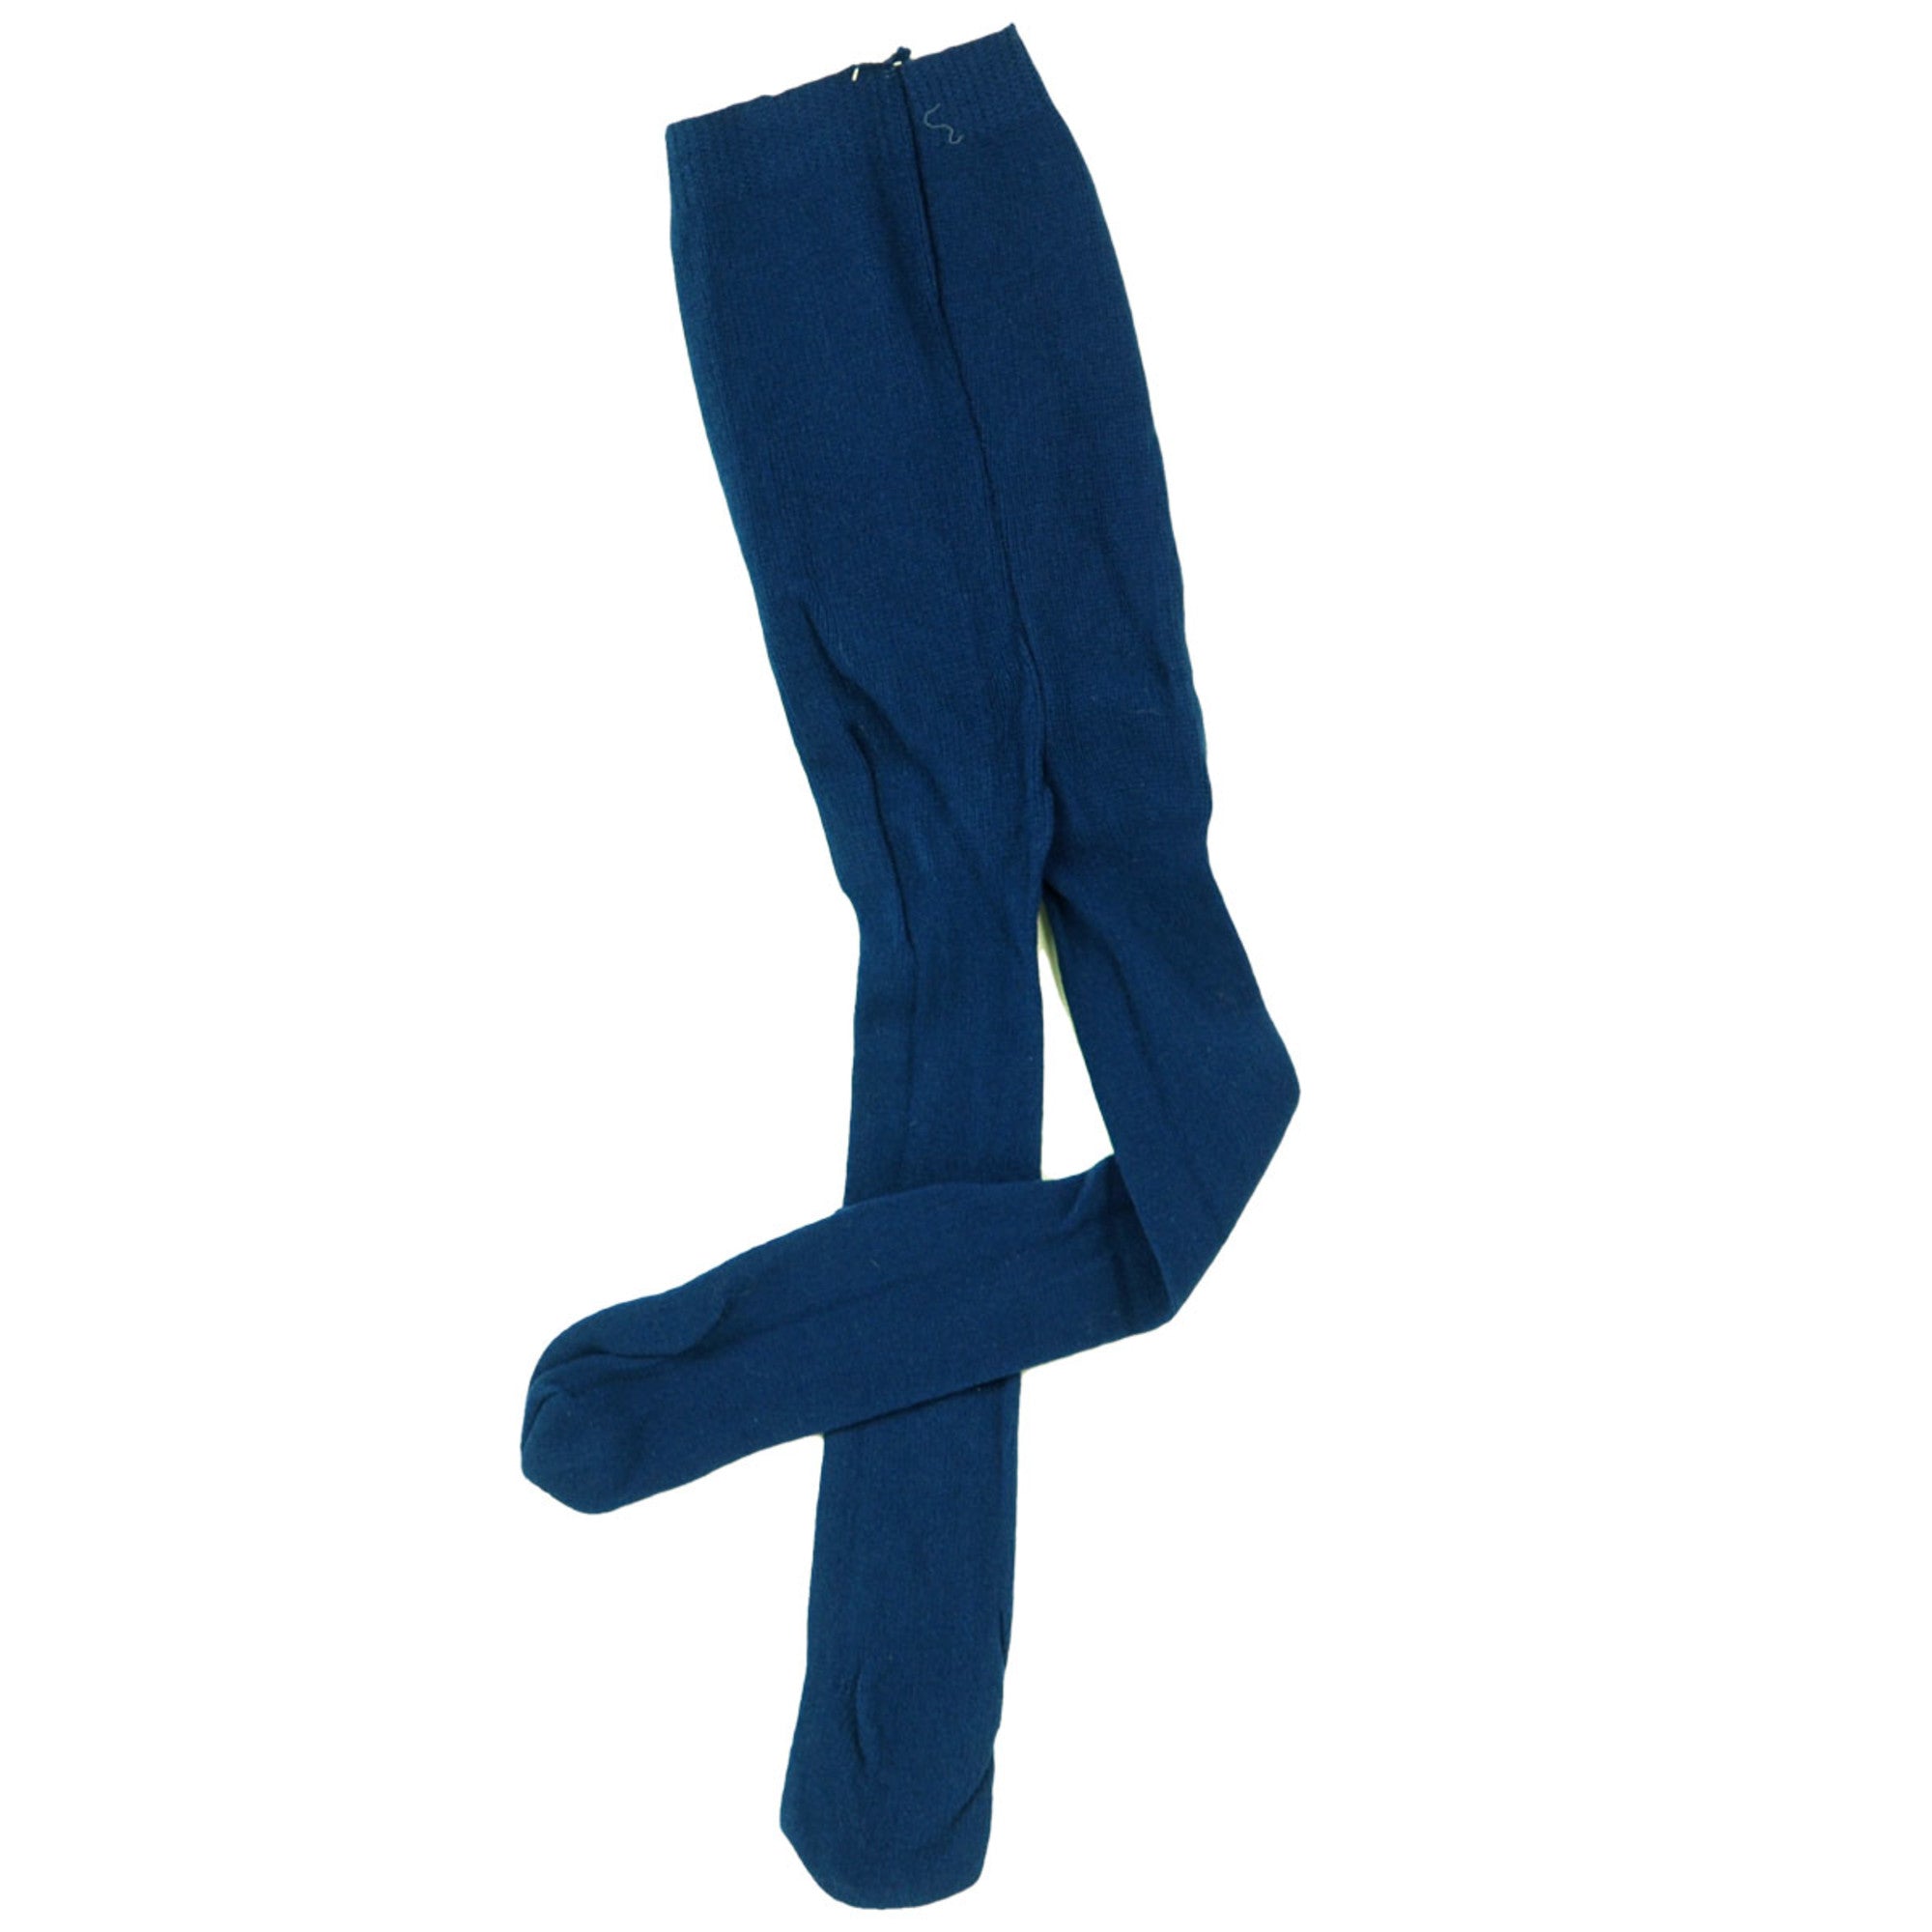 Sophia’s Mix & Match Wardrobe Essentials Basic Solid-Colored Opaque Tights for 18” Dolls, Navy Blue